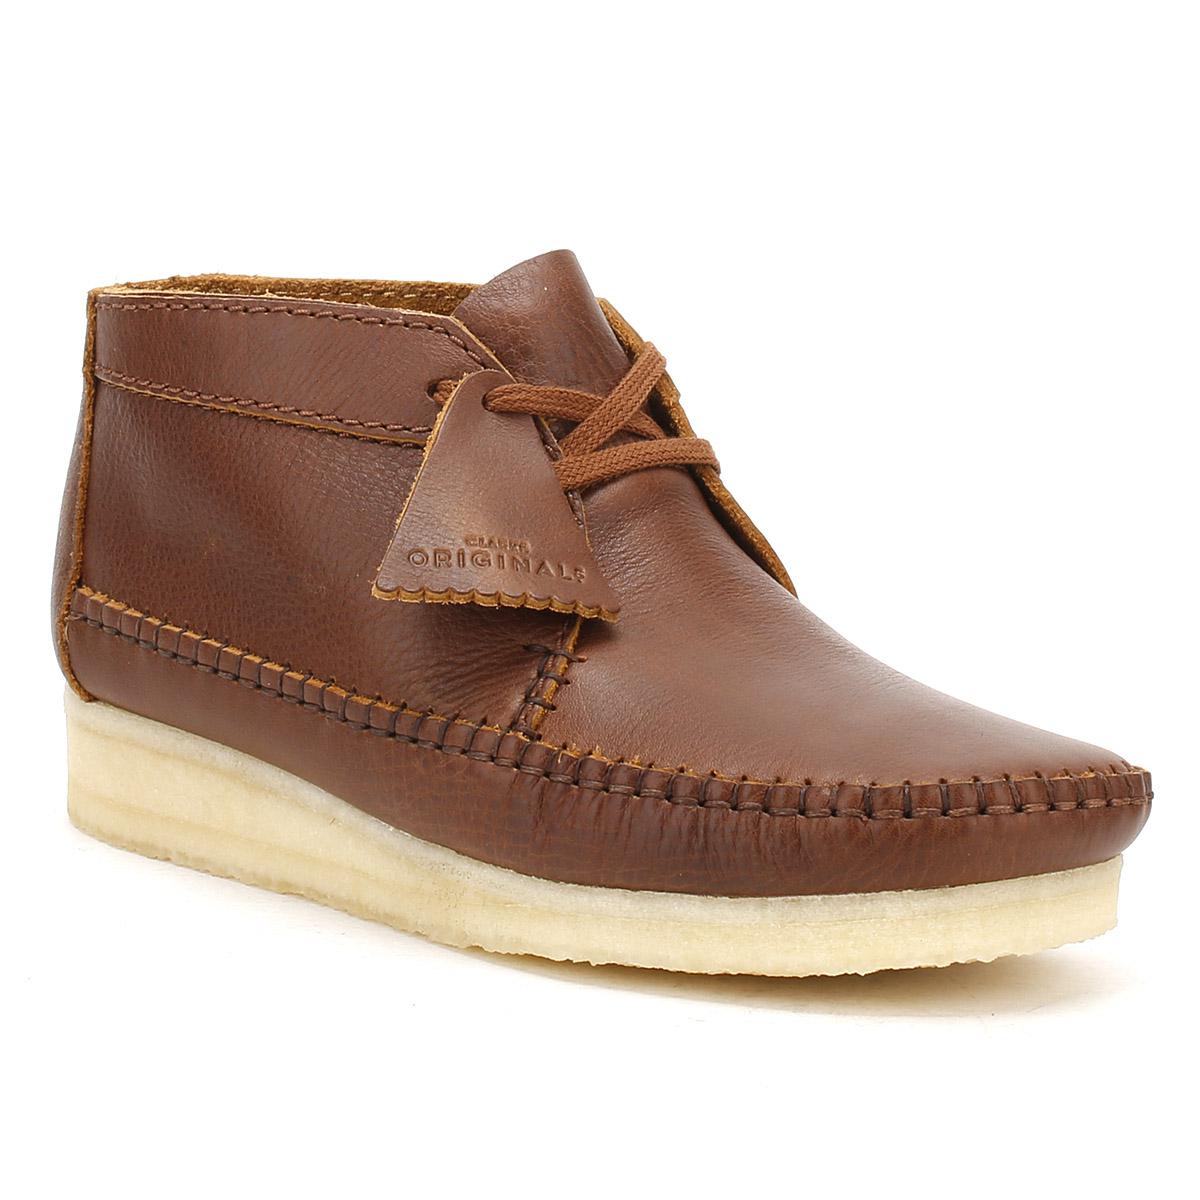 Padre flor dirección Clarks Weaver Boot Tan Leather Store, SAVE 50%.